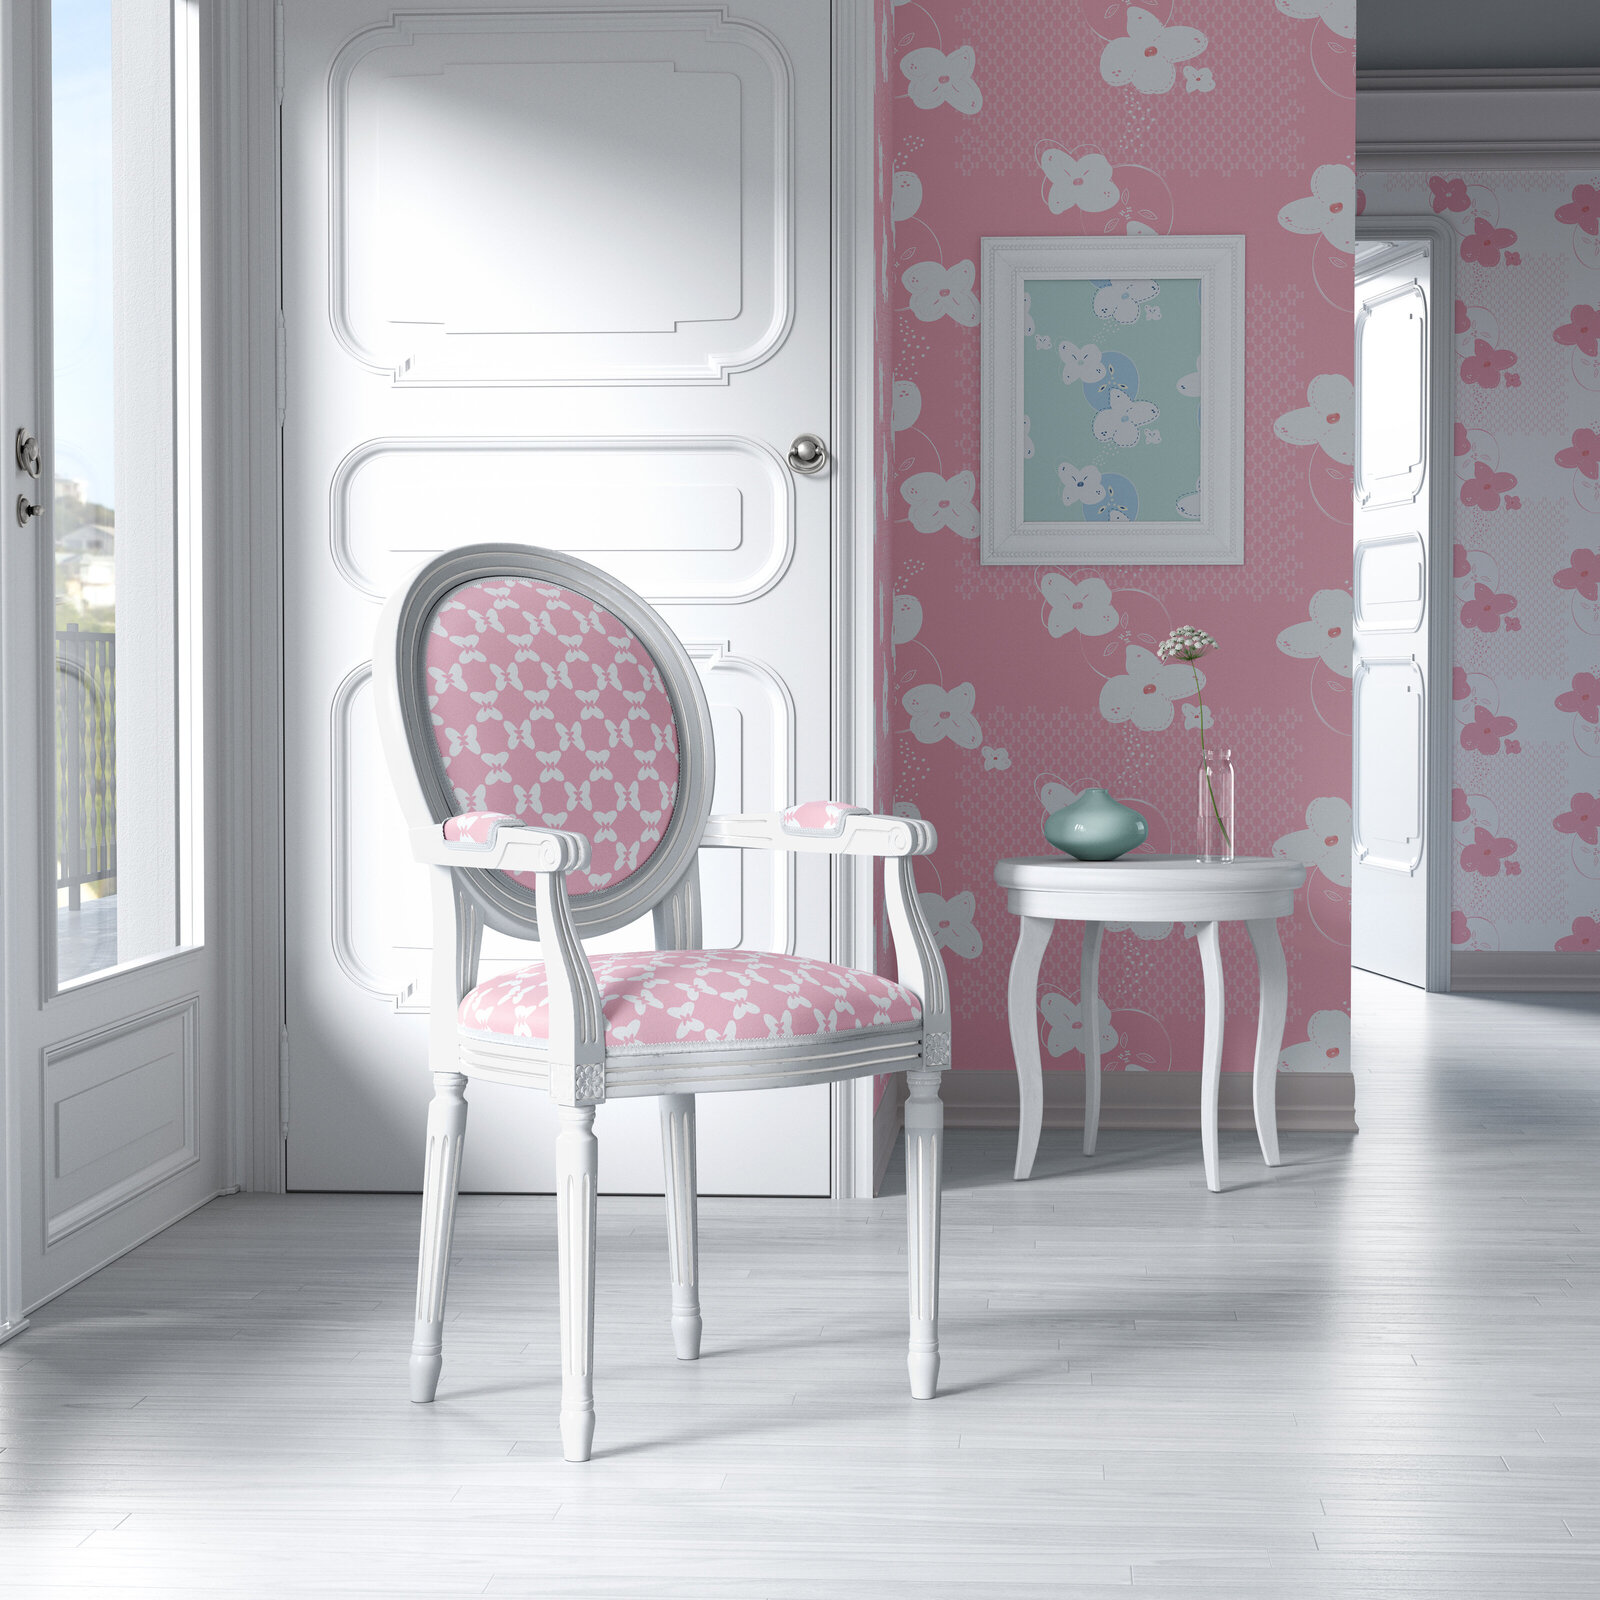 Room with pink and white floral wallpaper